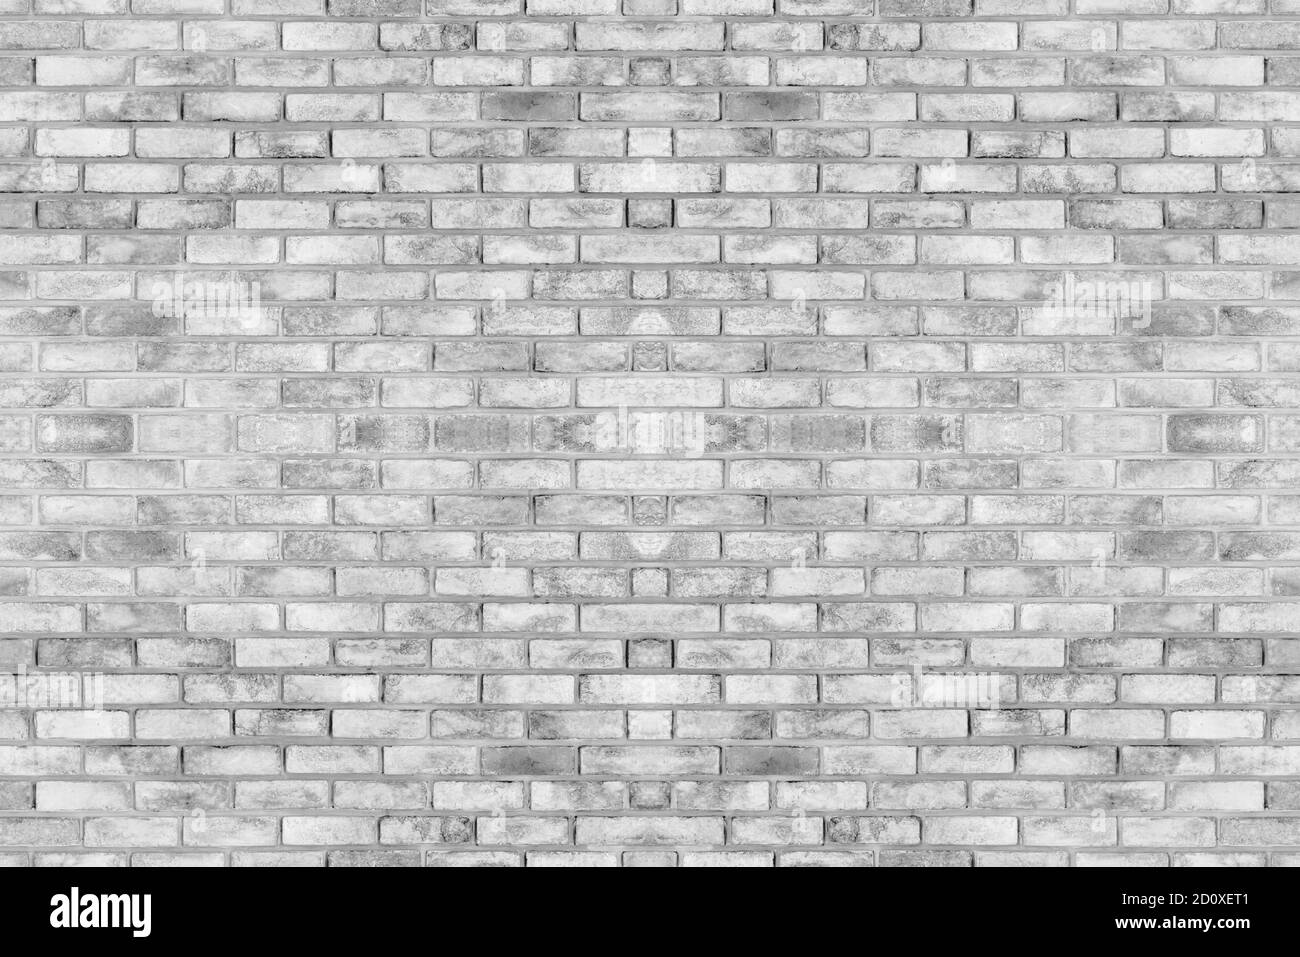 Background of brick wall with old texture pattern. Vintage style and grunge retro interior. Stock Photo